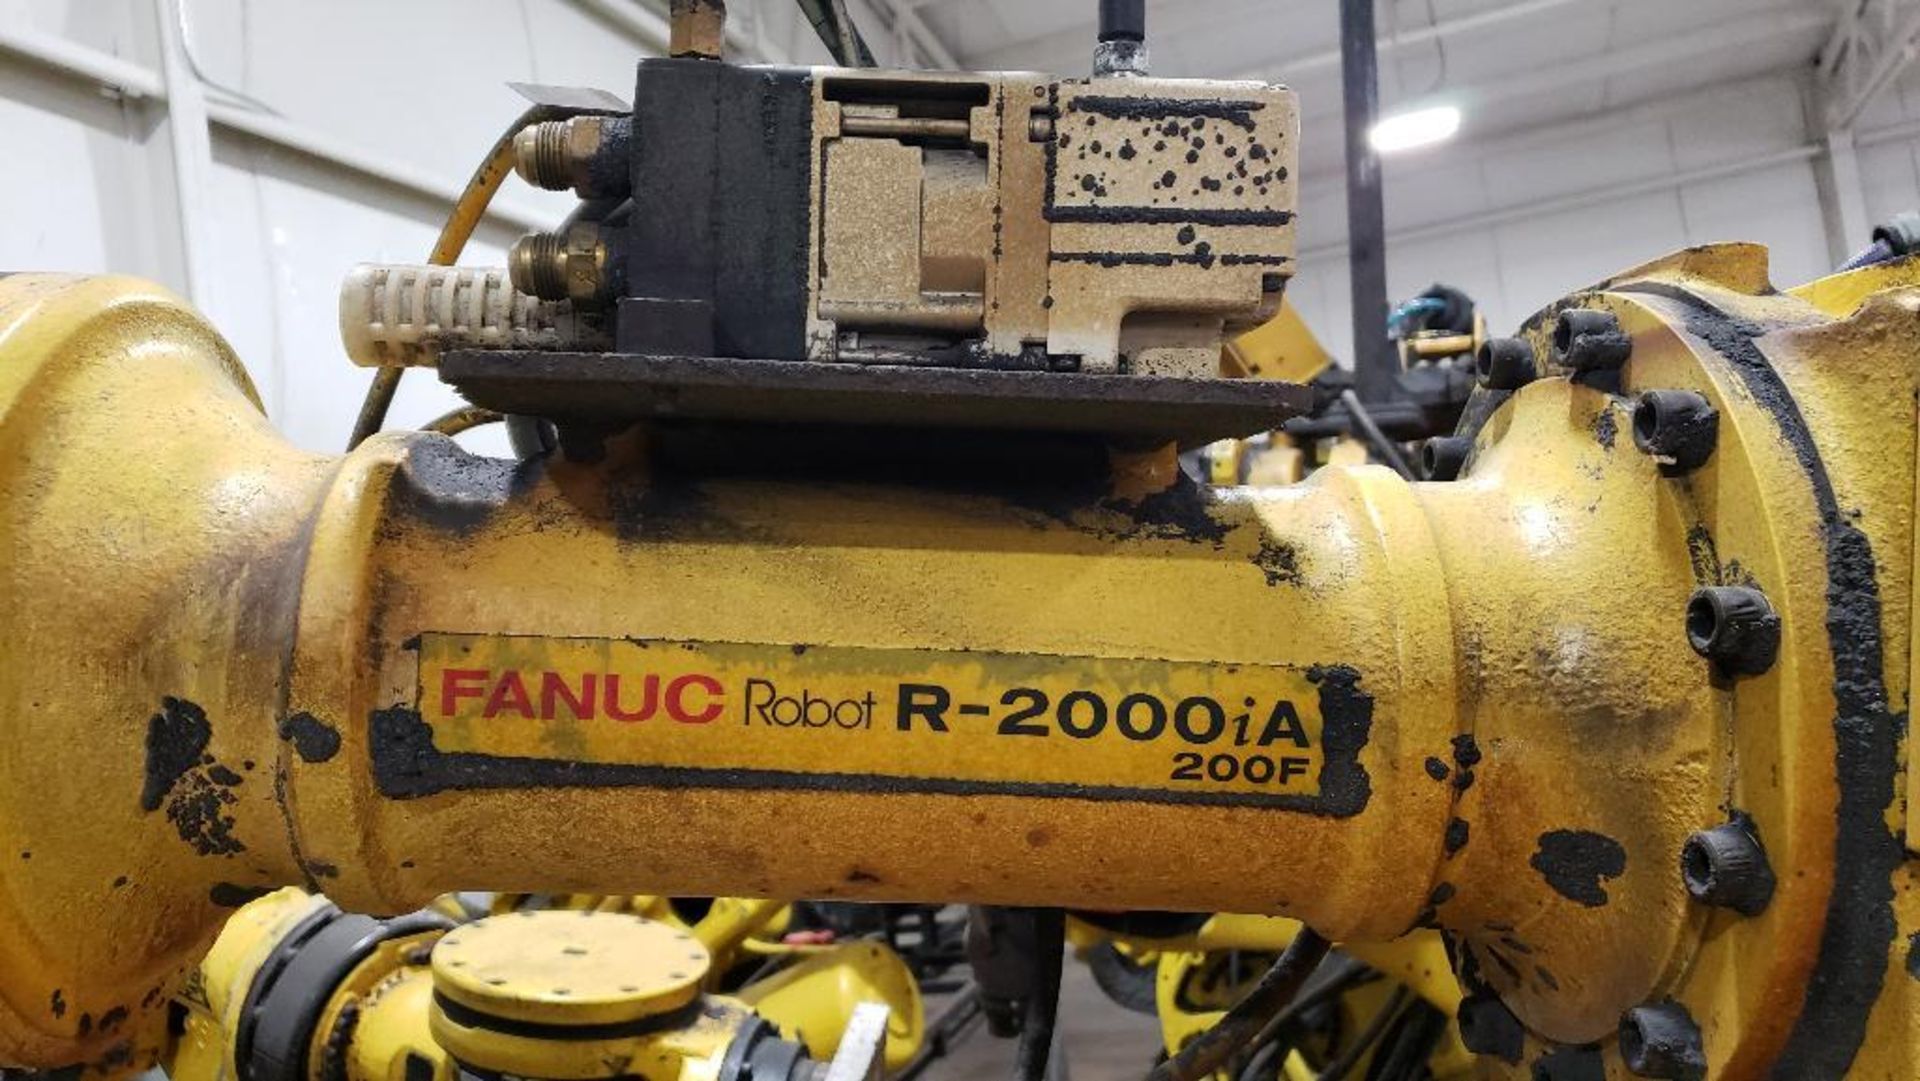 Fanuc R-2000iA/200F robot with Fanuc System R-J3iB controller. - Image 5 of 14